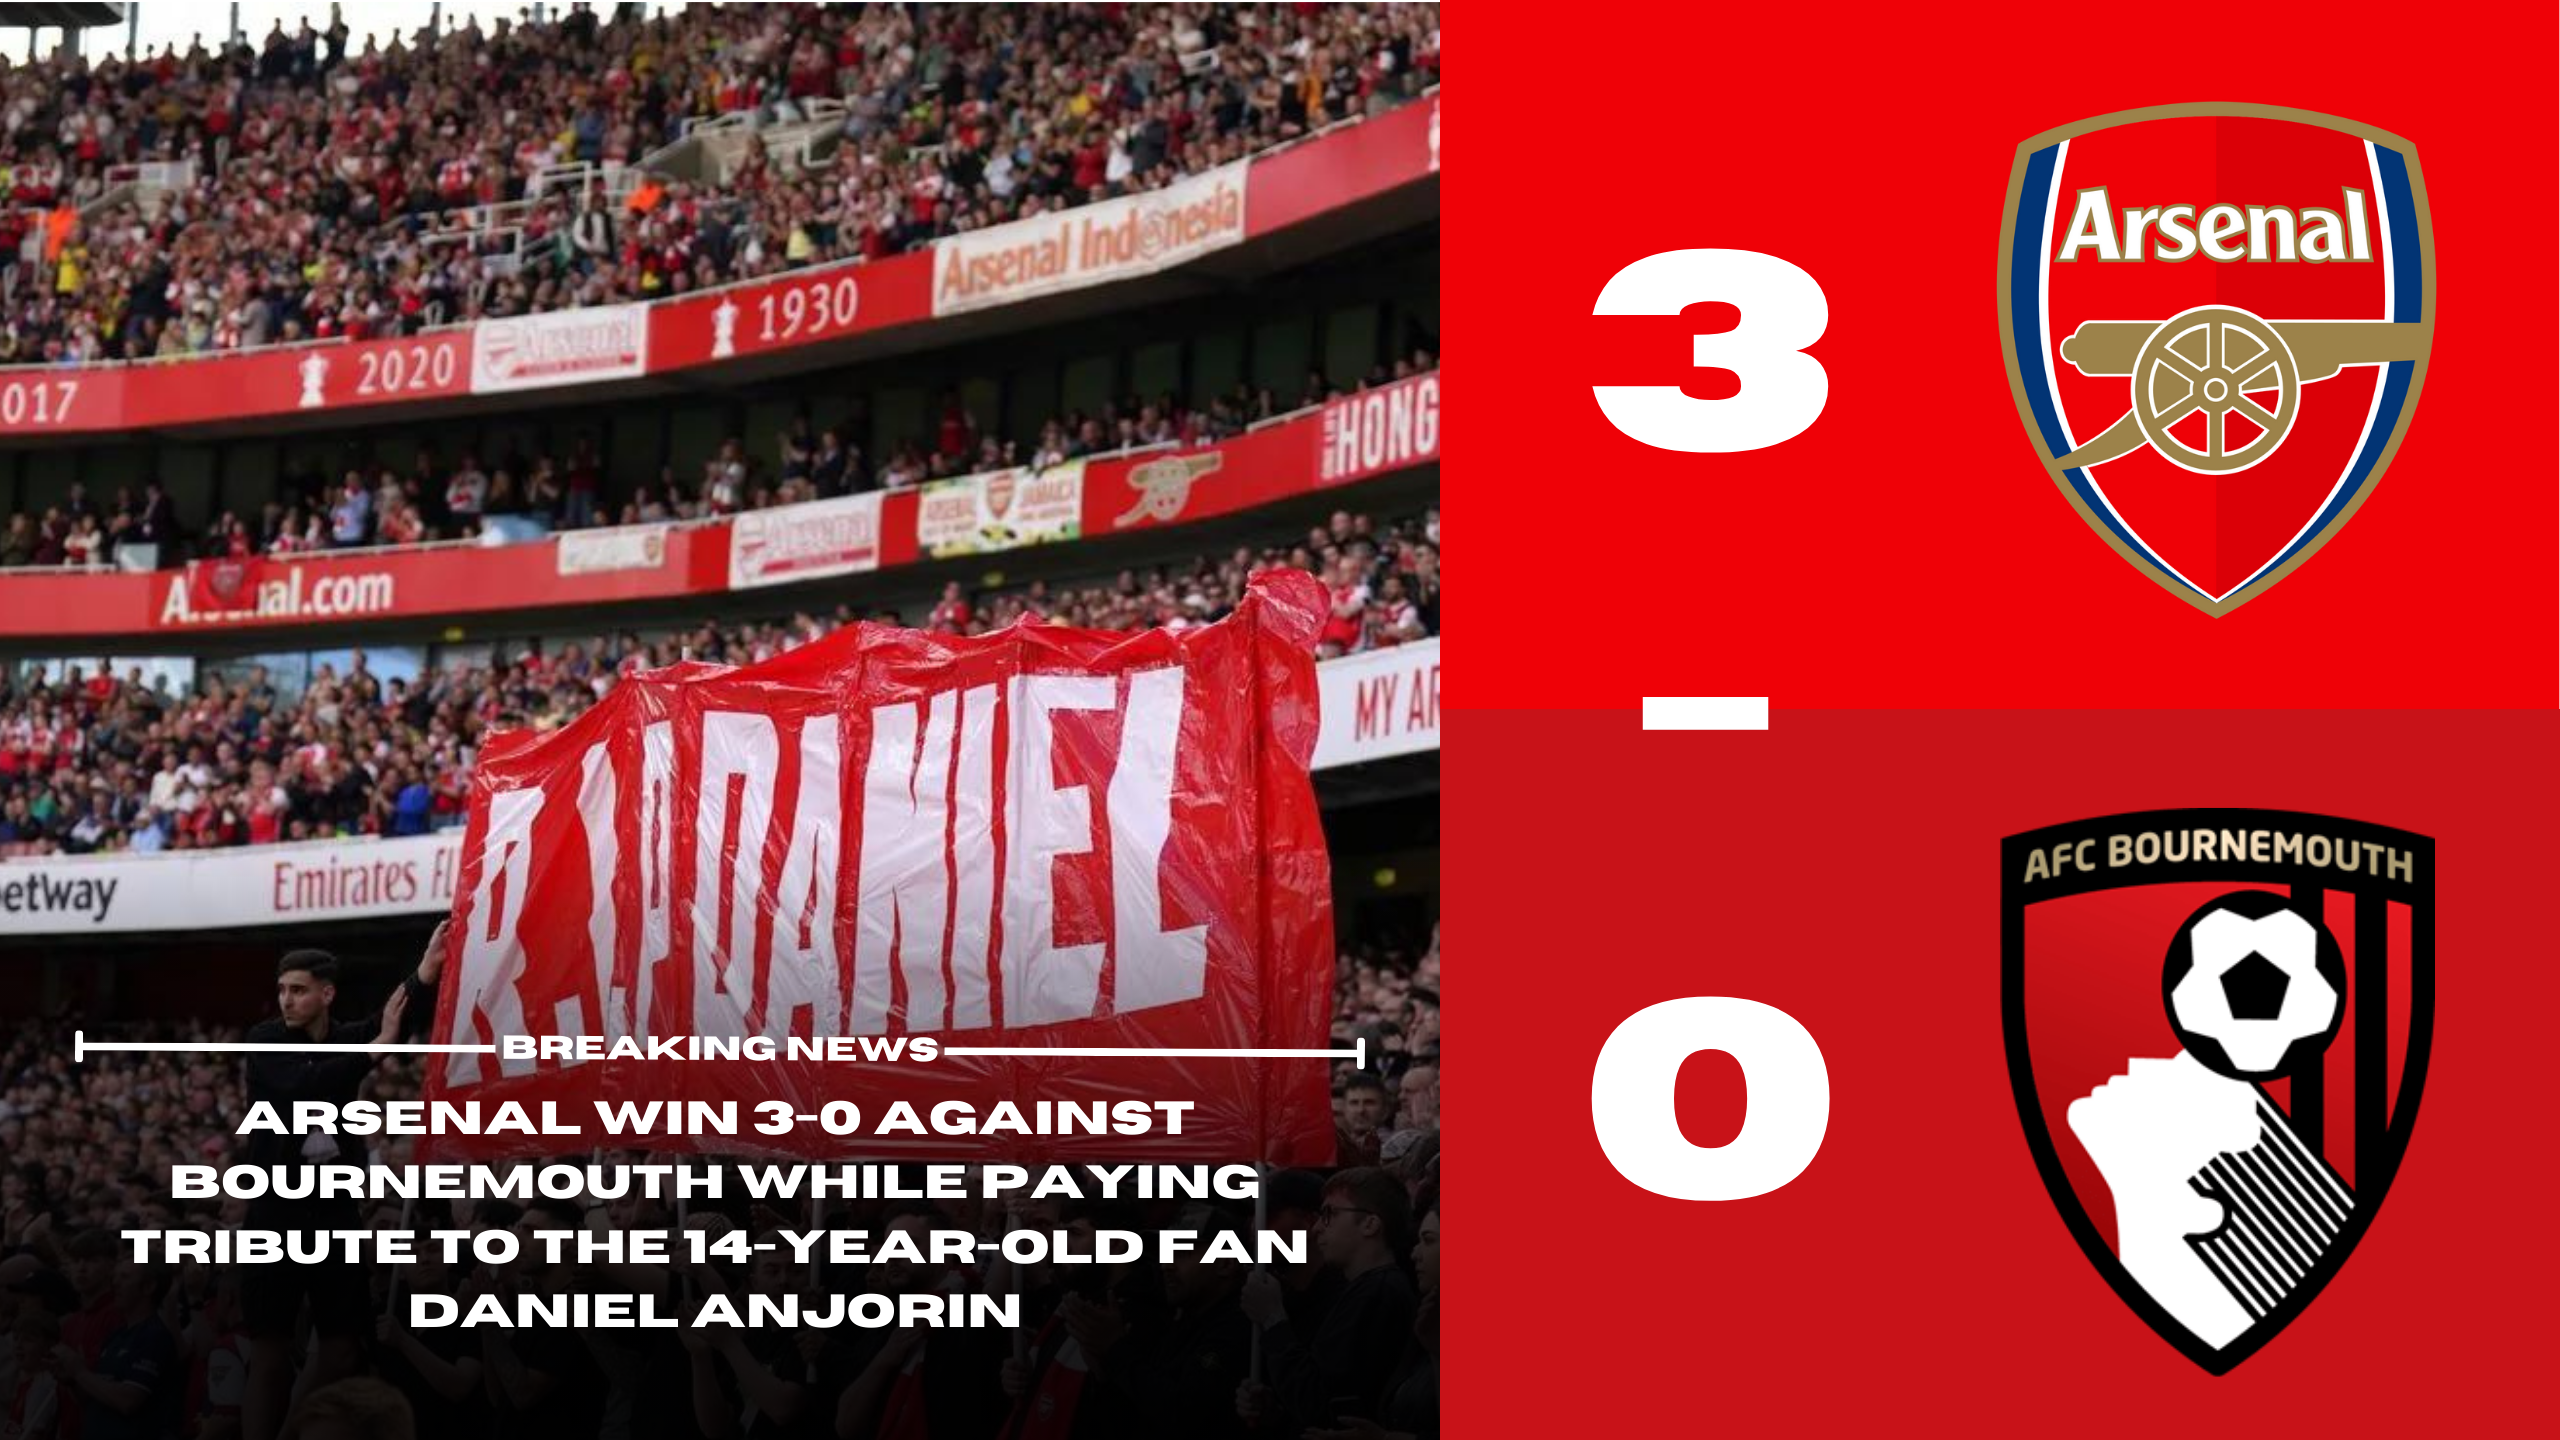 Arsenal win 3-0 against Bournemouth while paying tribute to the 14-year-old fan Daniel Anjorin 